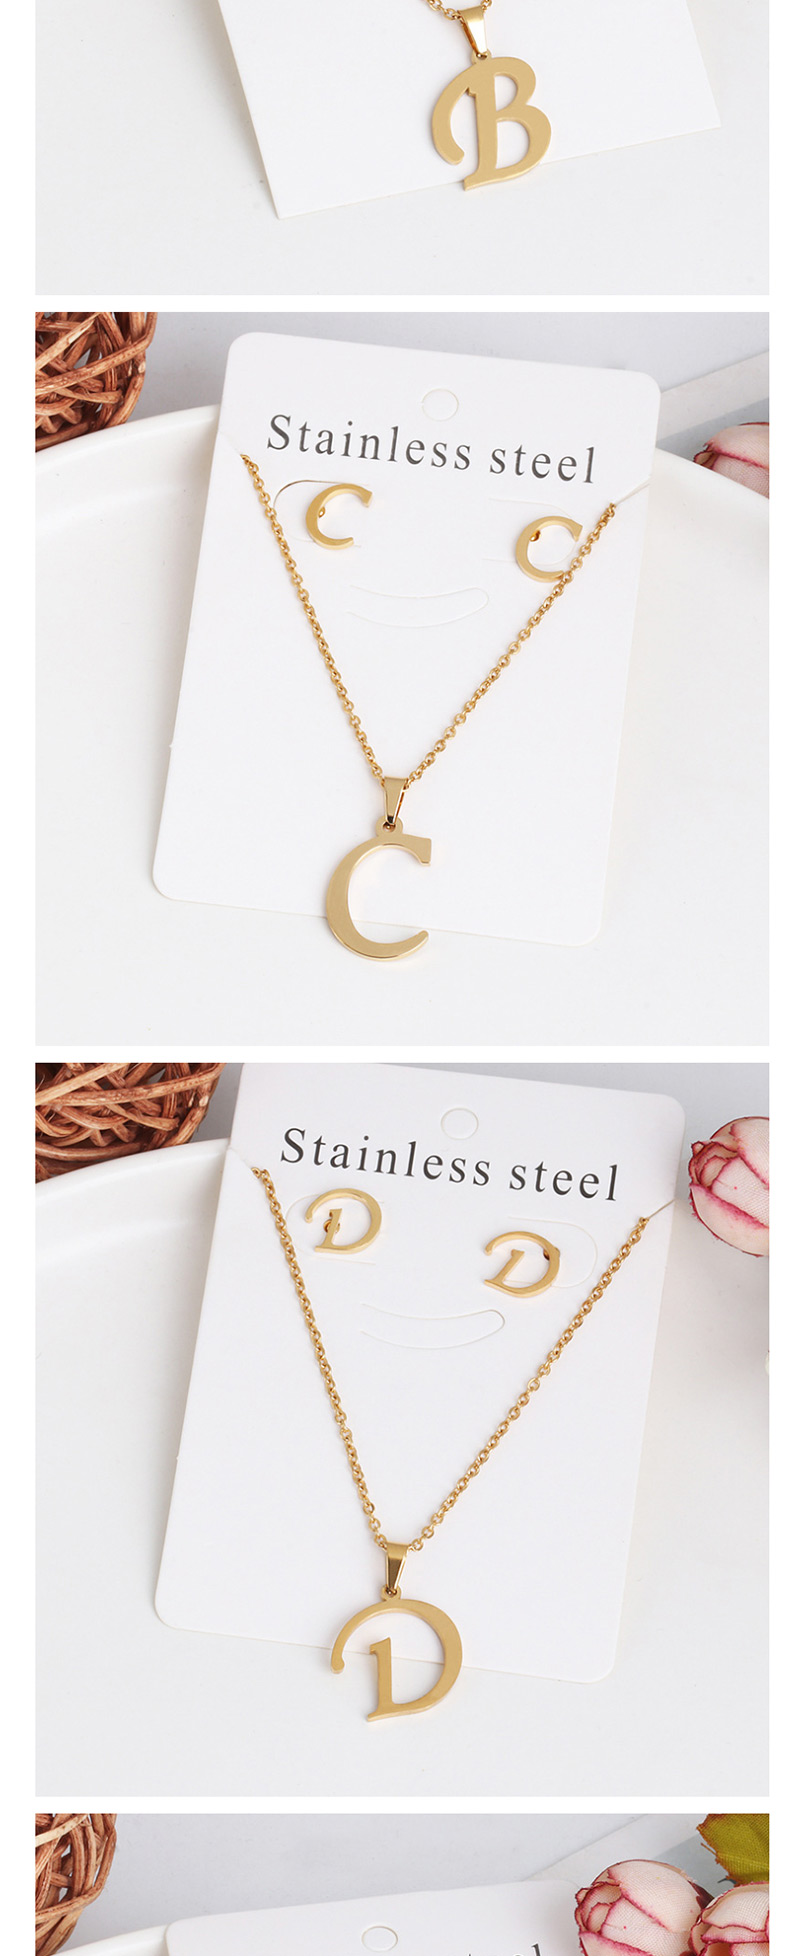 Fashion A Gold Stainless Steel Letter Necklace Earrings Two-piece,Jewelry Sets